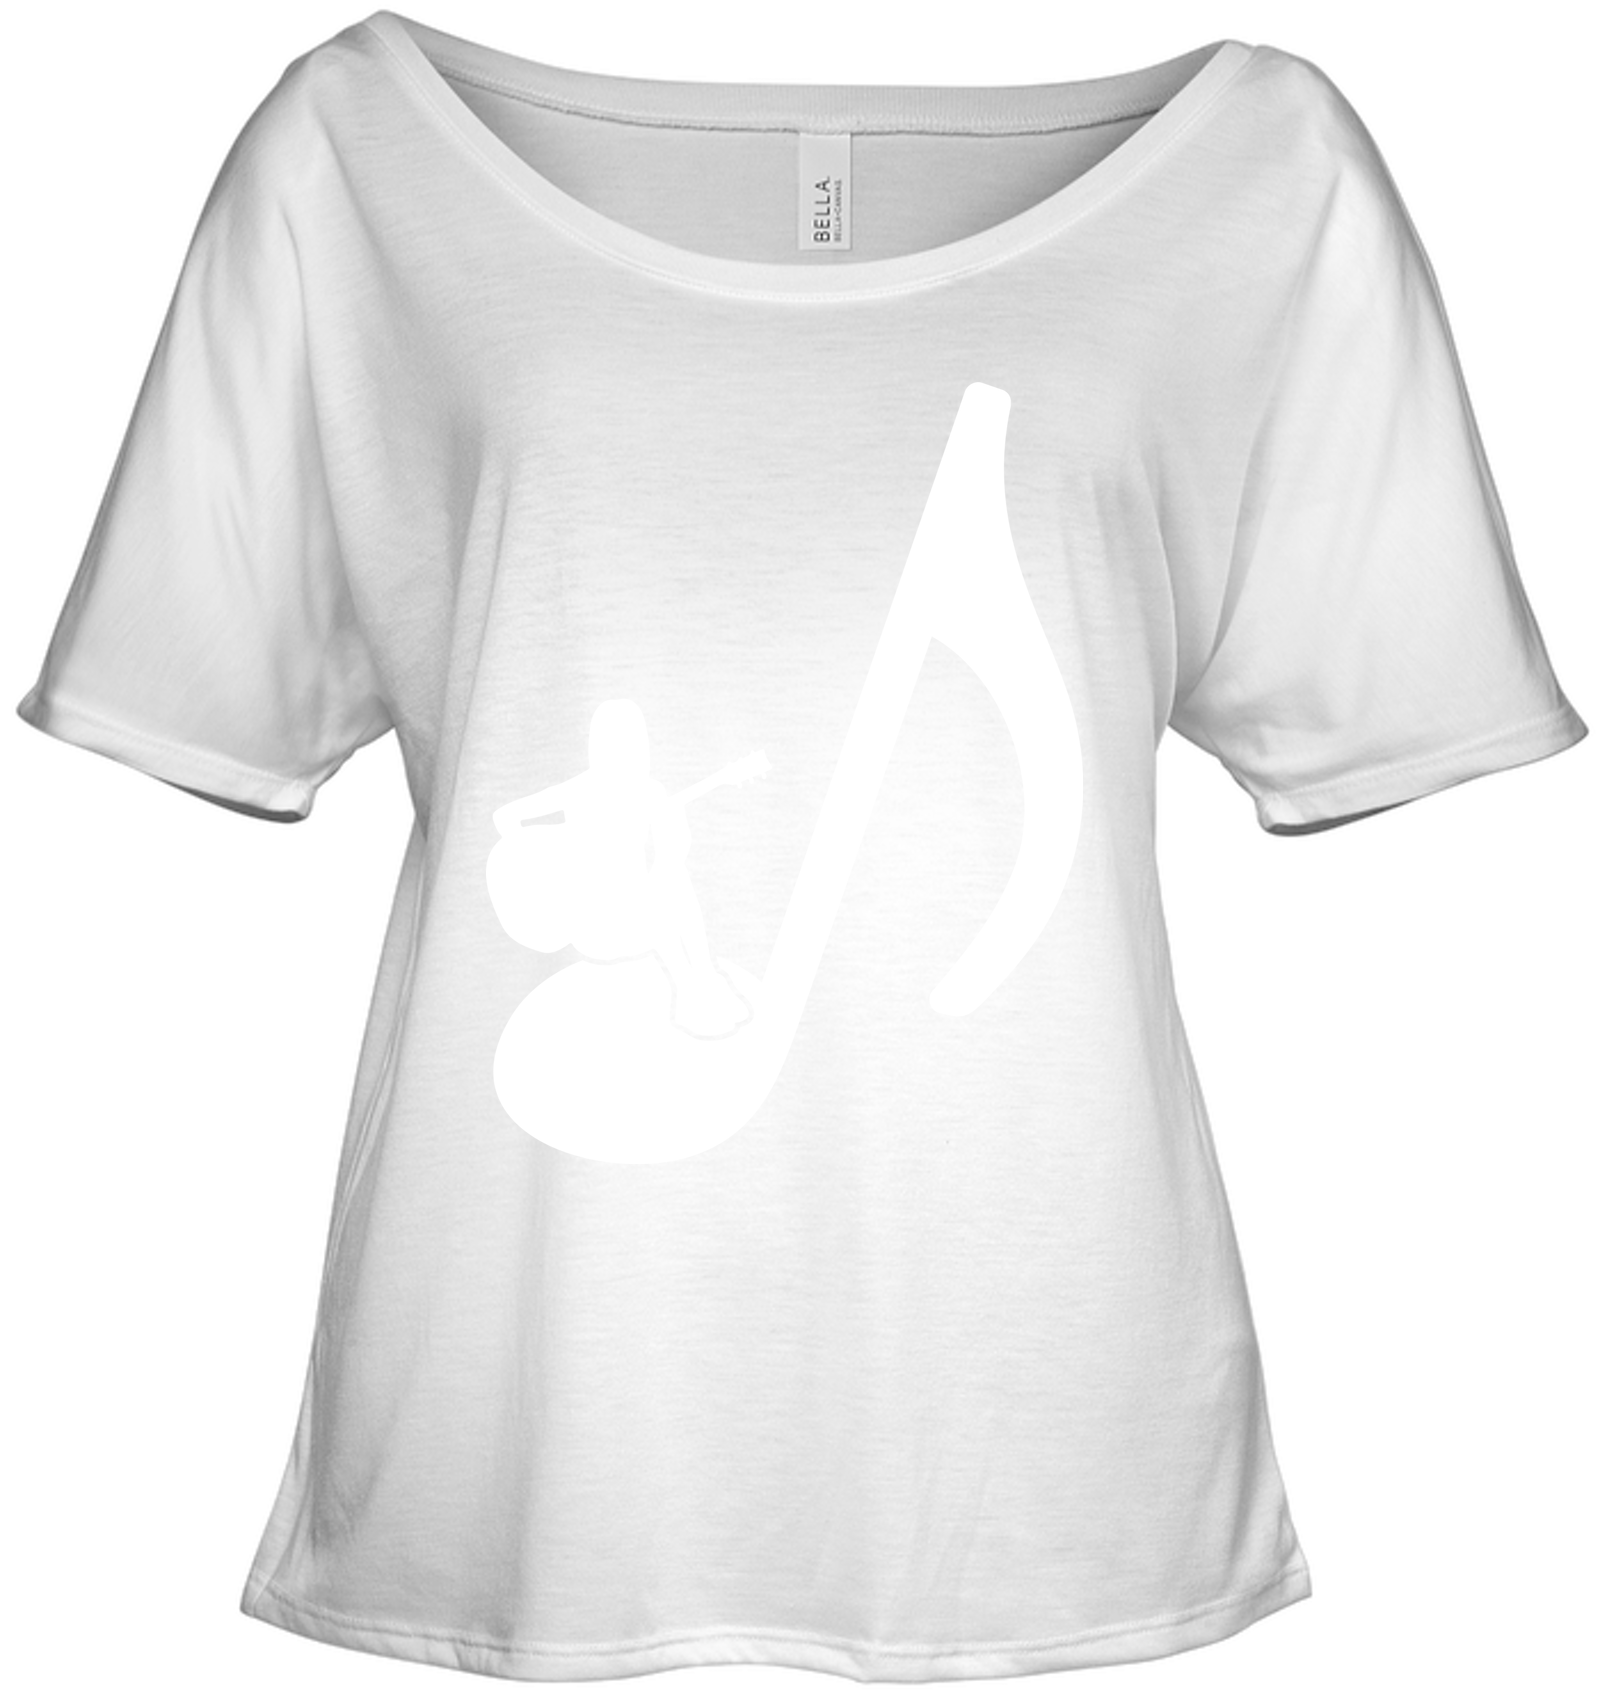 Sitting on a Note - Bella + Canvas Women's Slouchy Tee